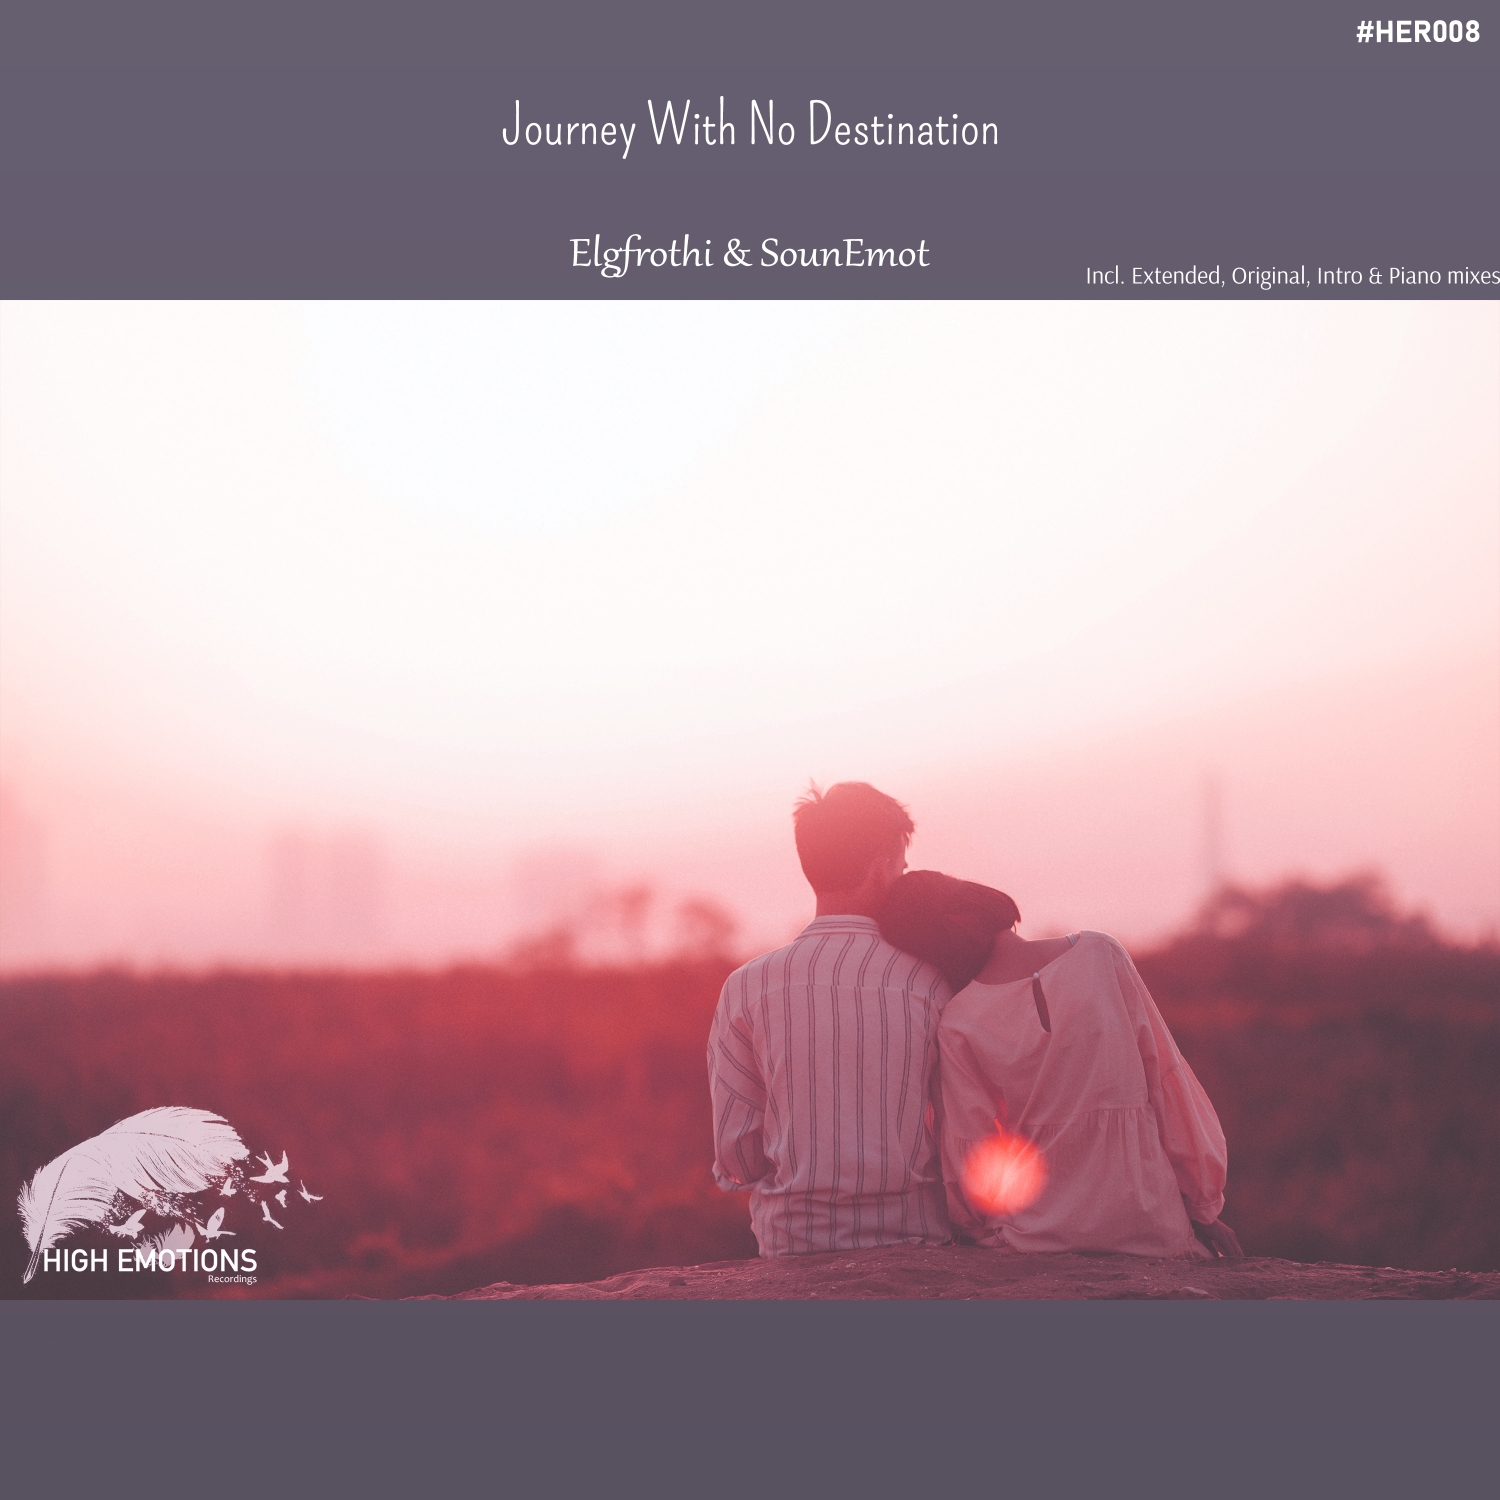 Elgfrothi and SounEmot presents Journey With No Destination on High Emotions Recordings